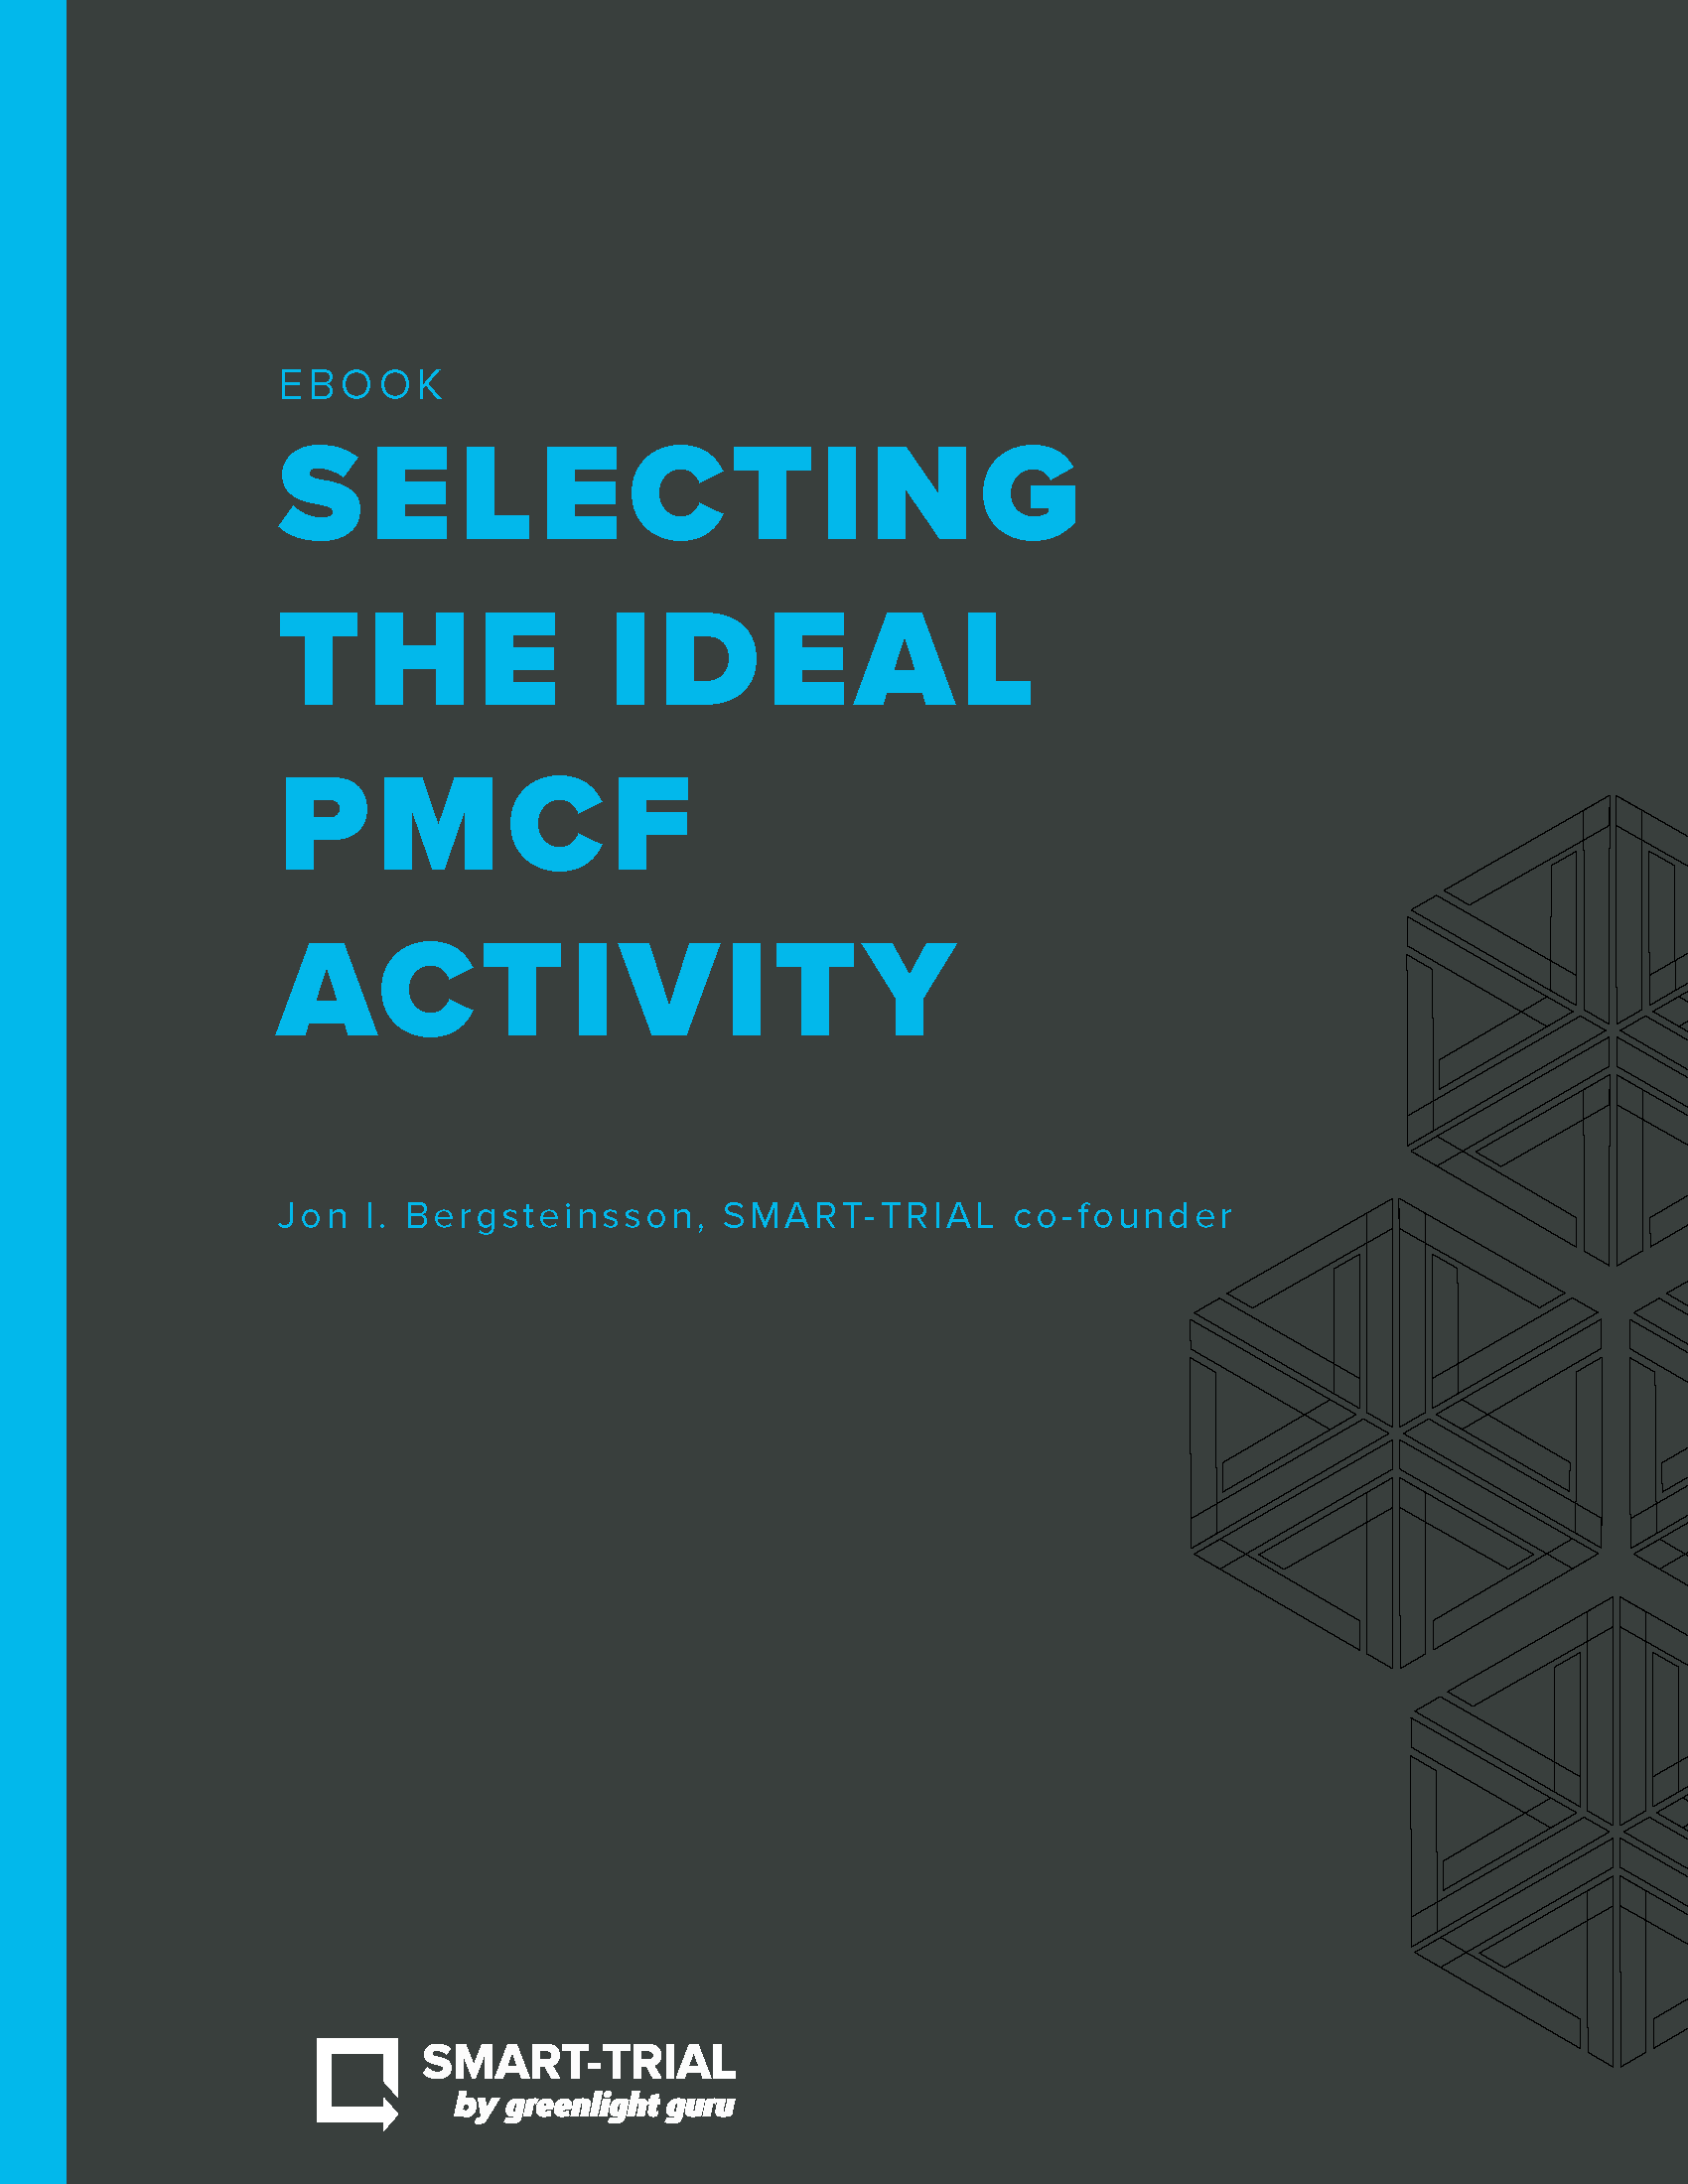 (cover) Ultimate Guide to Selecting the Ideal PMCF Activity